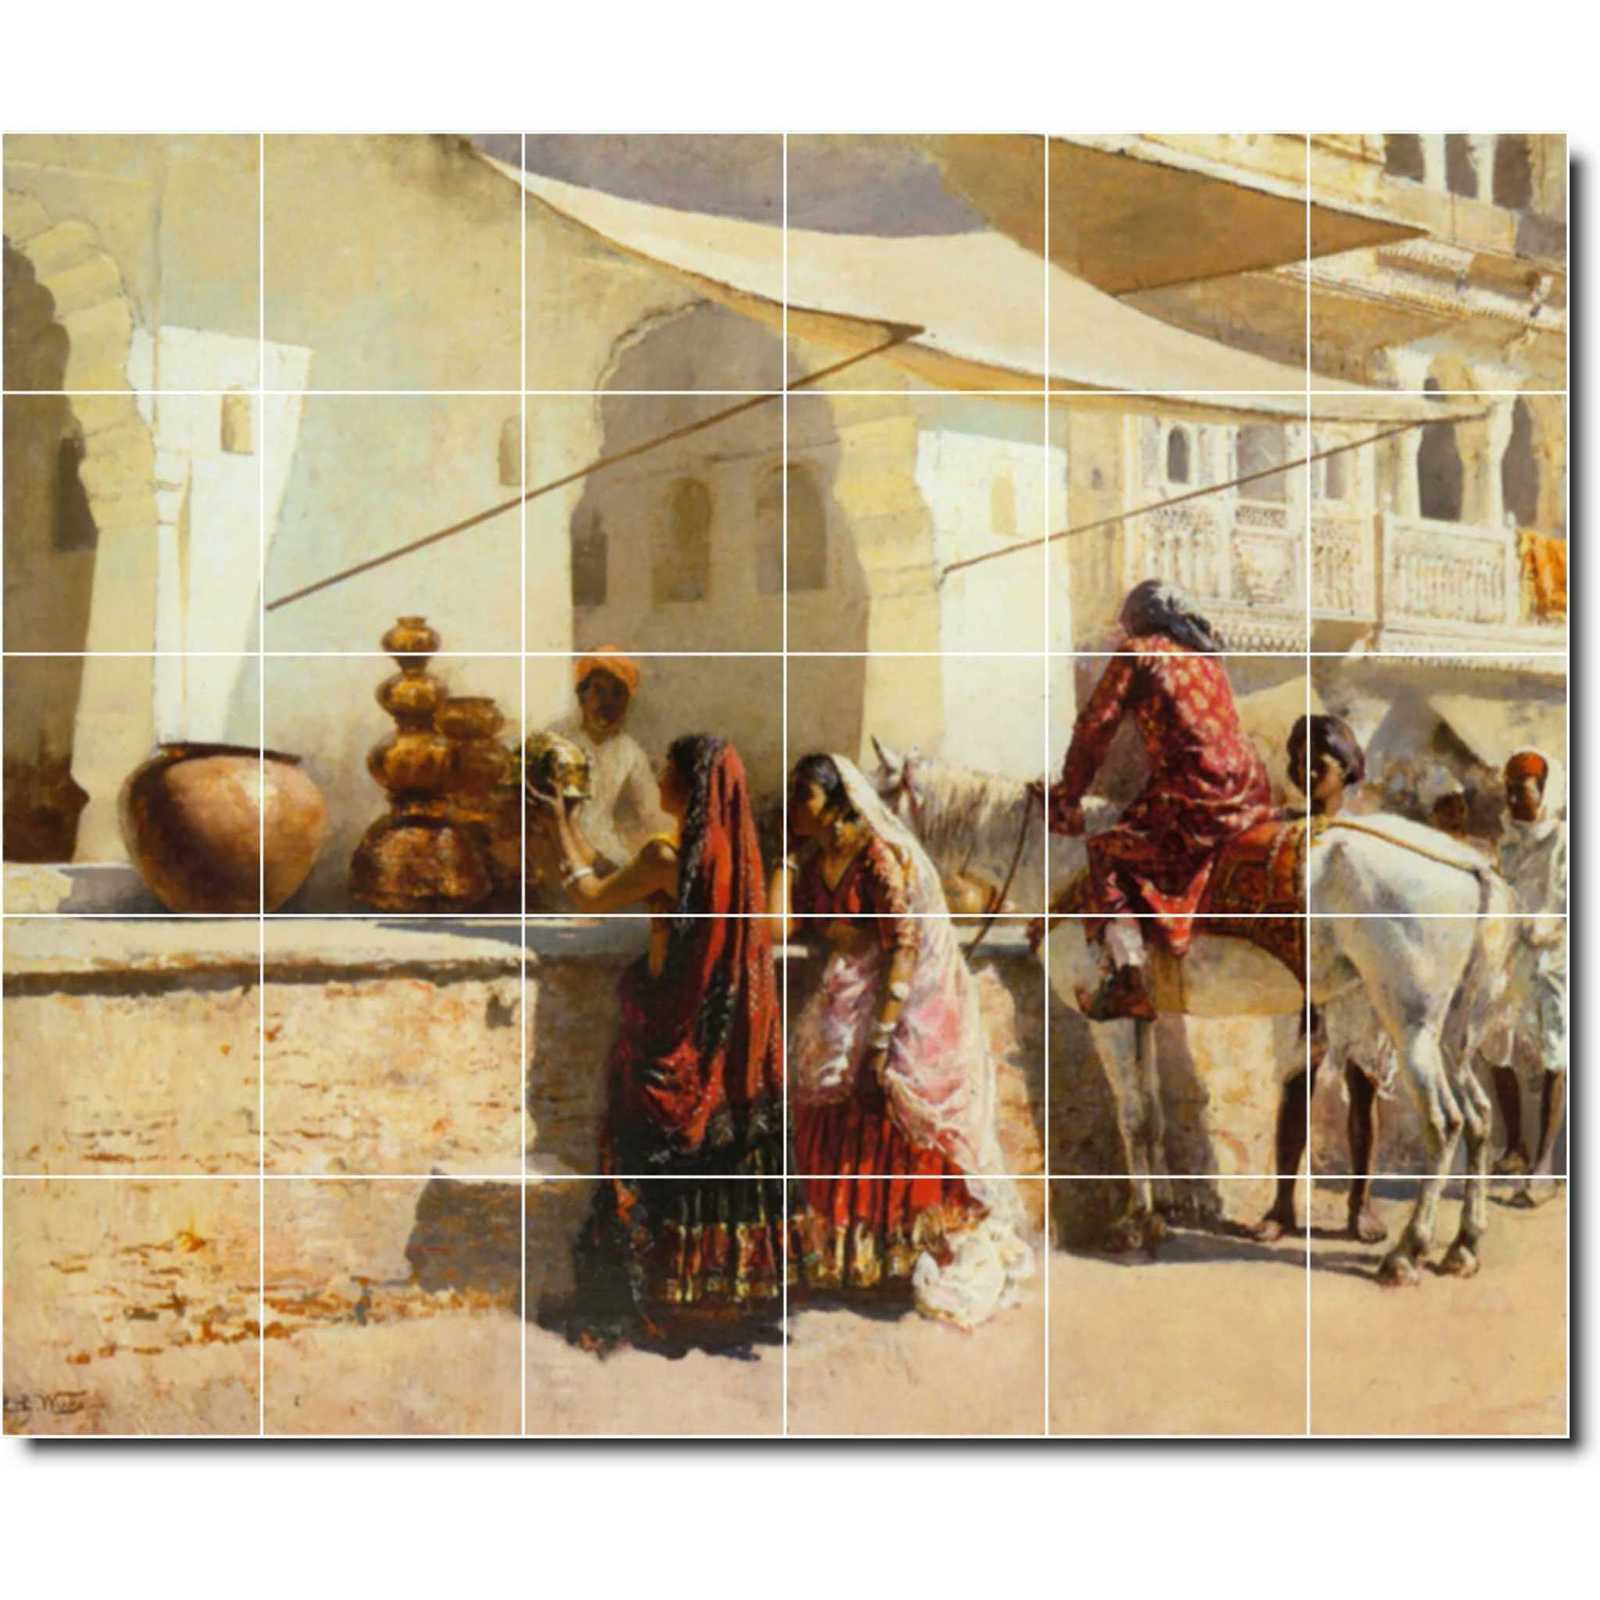 Primary image for Edwin Weeks Village Painting Ceramic Tile Mural BTZ09561